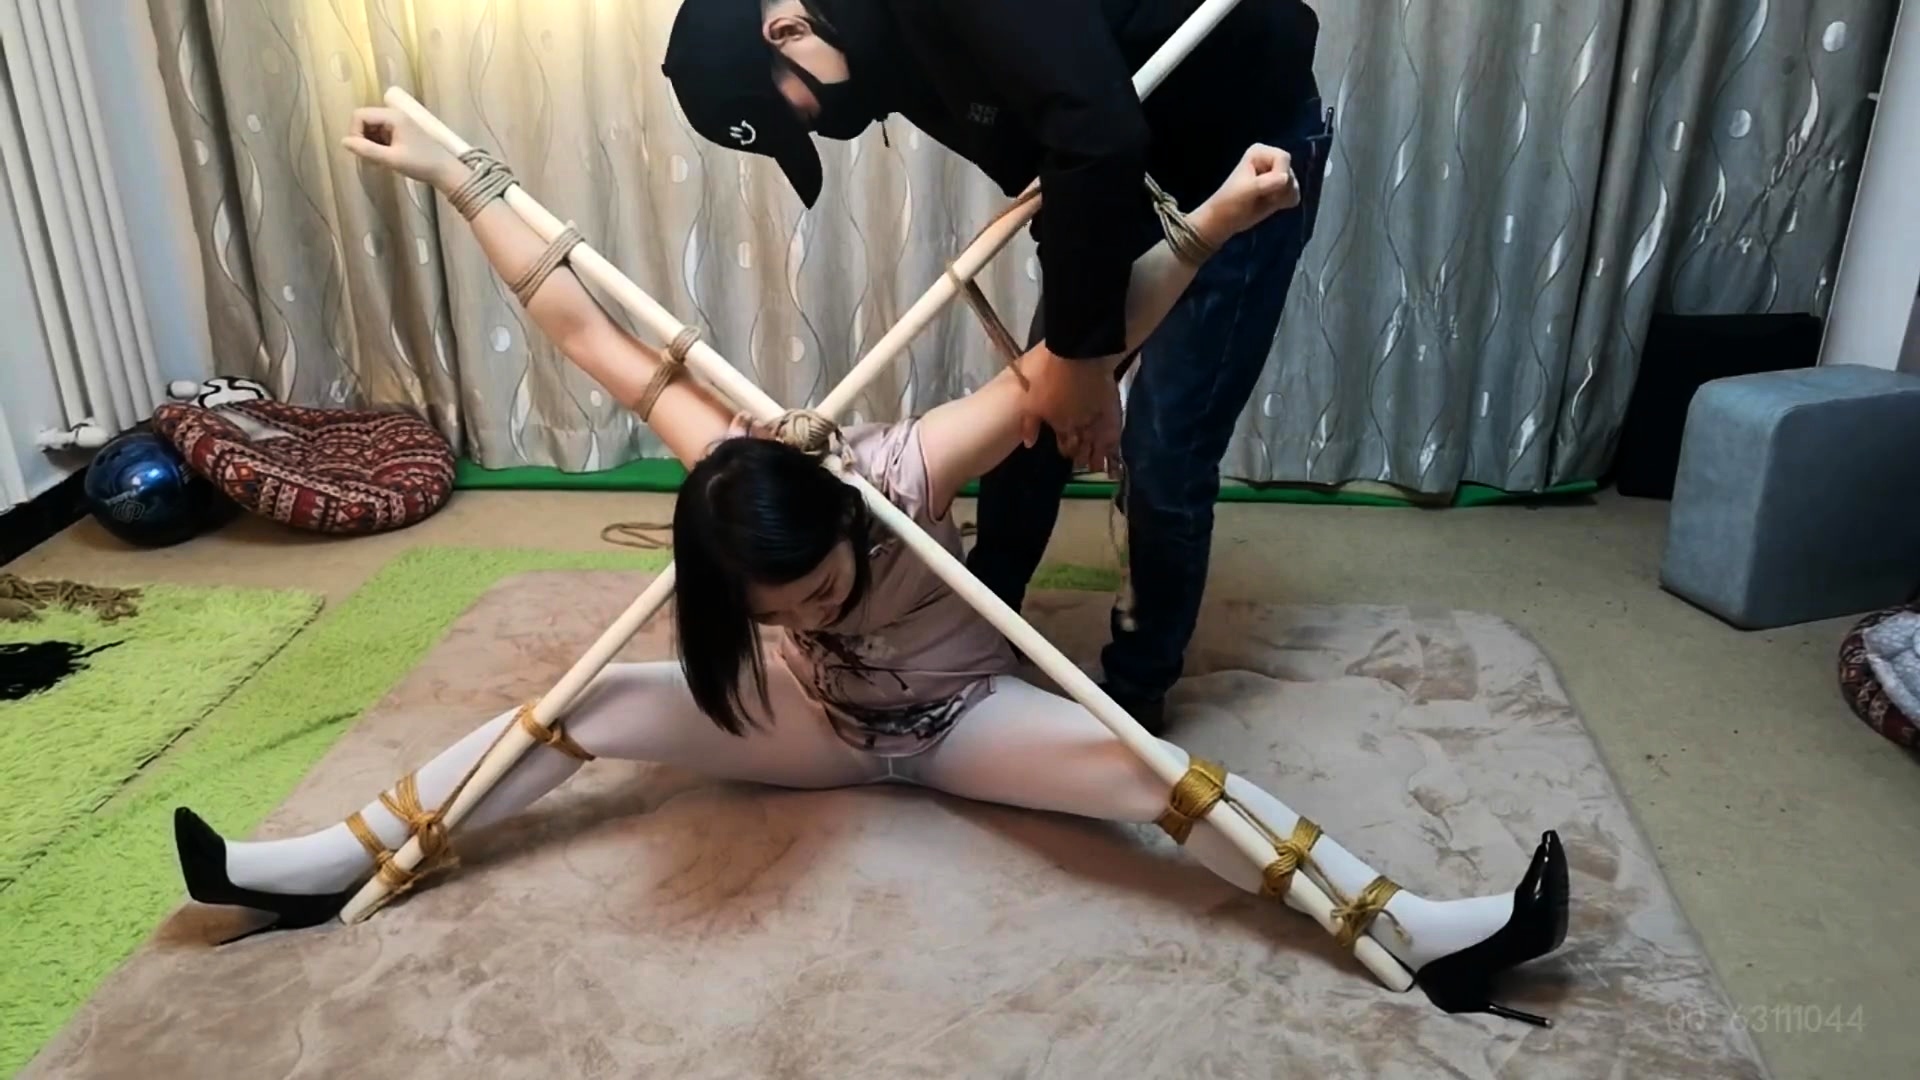 Lovely Asian Babe In Pantyhose Learns A Lesson In Bondage Video at Porn Lib